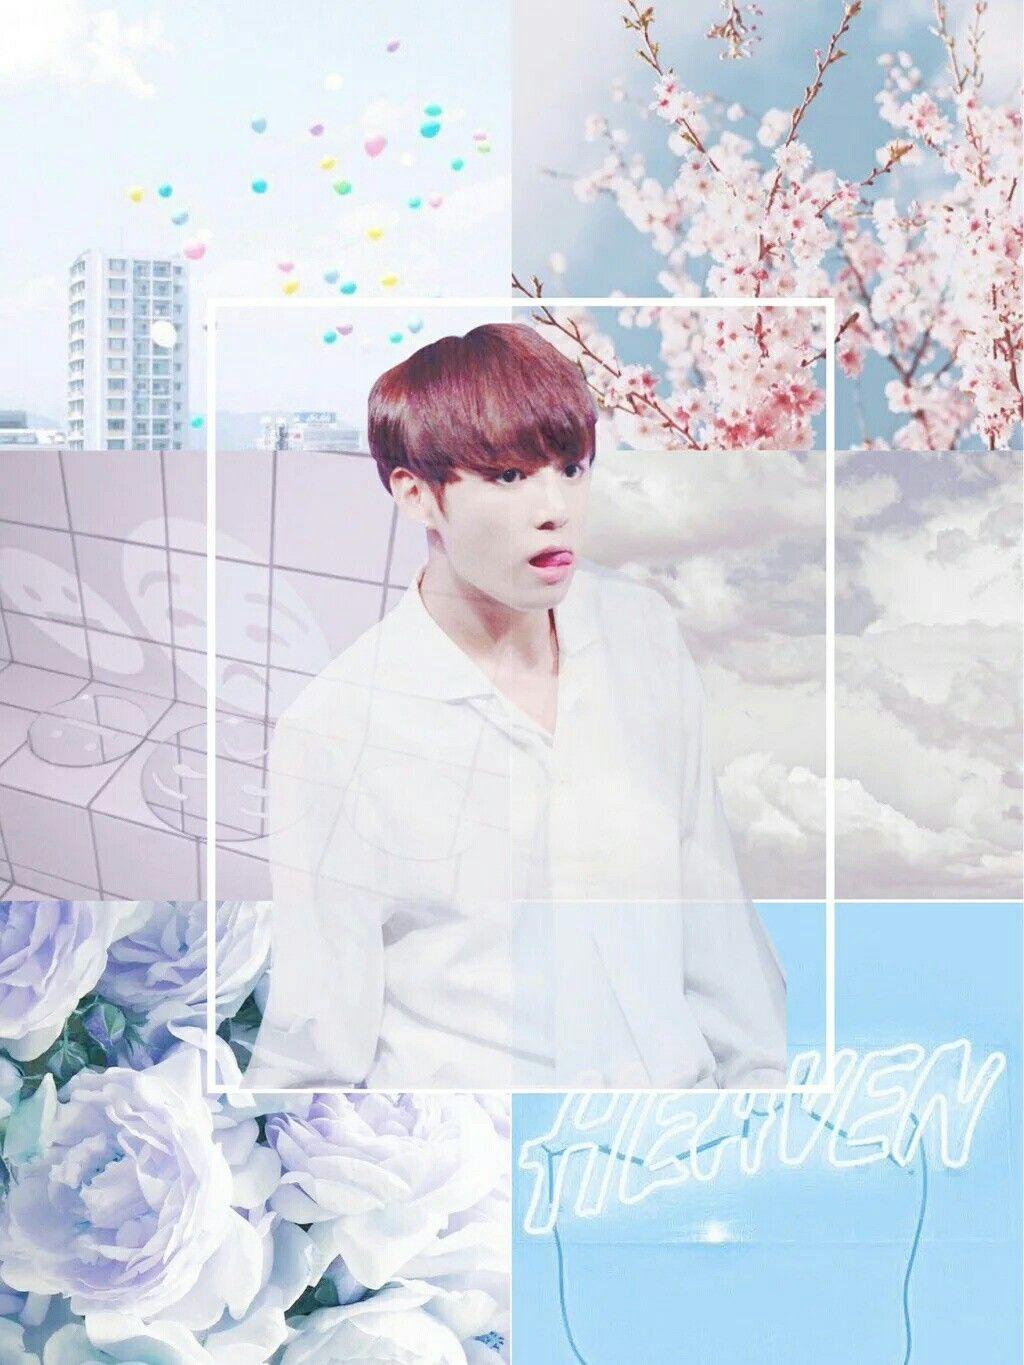 Collection of Bts Jungkook Wallpaper (image in Collection)